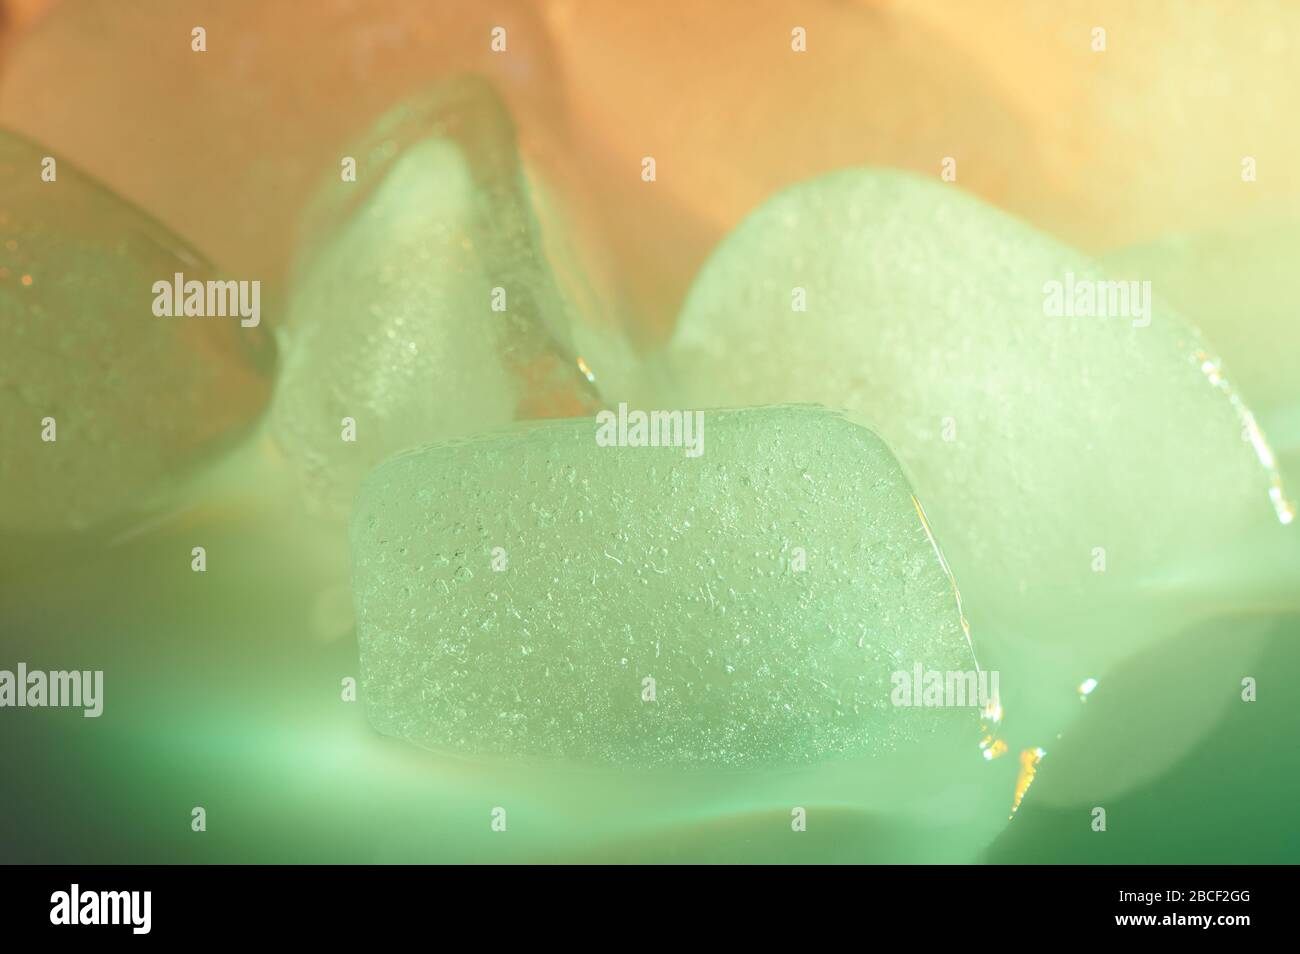 Macro of green ice cube on blurred colorful background Stock Photo